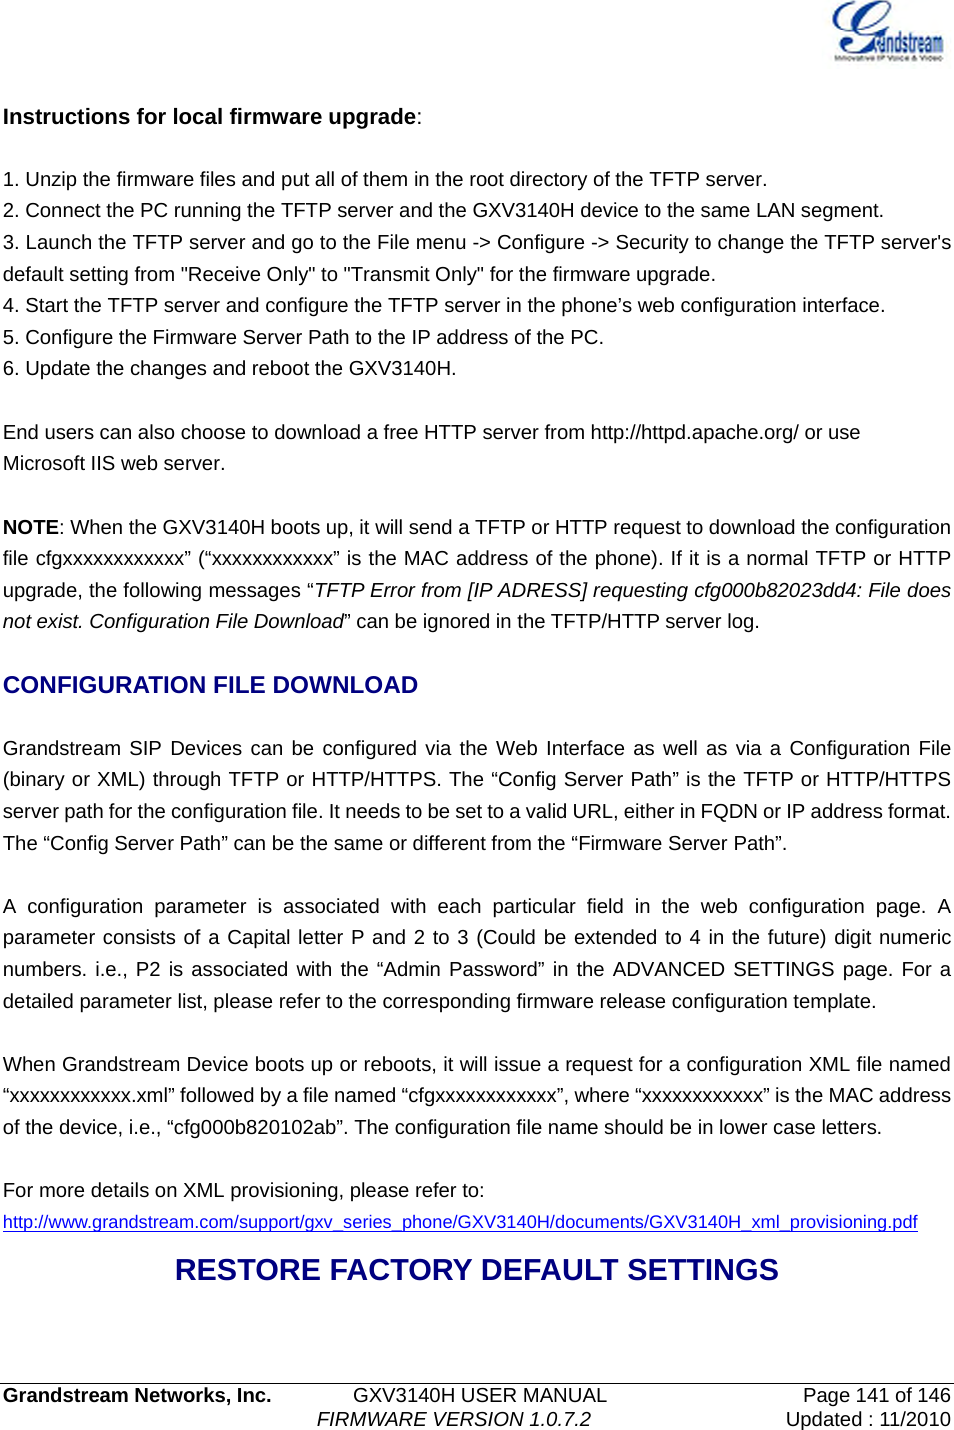   Grandstream Networks, Inc.        GXV3140H USER MANUAL                  Page 141 of 146                                FIRMWARE VERSION 1.0.7.2 Updated : 11/2010   Instructions for local firmware upgrade:  1. Unzip the firmware files and put all of them in the root directory of the TFTP server. 2. Connect the PC running the TFTP server and the GXV3140H device to the same LAN segment. 3. Launch the TFTP server and go to the File menu -&gt; Configure -&gt; Security to change the TFTP server&apos;s default setting from &quot;Receive Only&quot; to &quot;Transmit Only&quot; for the firmware upgrade. 4. Start the TFTP server and configure the TFTP server in the phone’s web configuration interface. 5. Configure the Firmware Server Path to the IP address of the PC. 6. Update the changes and reboot the GXV3140H.  End users can also choose to download a free HTTP server from http://httpd.apache.org/ or use Microsoft IIS web server.  NOTE: When the GXV3140H boots up, it will send a TFTP or HTTP request to download the configuration file cfgxxxxxxxxxxxx” (“xxxxxxxxxxxx” is the MAC address of the phone). If it is a normal TFTP or HTTP upgrade, the following messages “TFTP Error from [IP ADRESS] requesting cfg000b82023dd4: File does not exist. Configuration File Download” can be ignored in the TFTP/HTTP server log.  CONFIGURATION FILE DOWNLOAD  Grandstream SIP Devices can be configured via the Web Interface as well as via a Configuration File (binary or XML) through TFTP or HTTP/HTTPS. The “Config Server Path” is the TFTP or HTTP/HTTPS server path for the configuration file. It needs to be set to a valid URL, either in FQDN or IP address format. The “Config Server Path” can be the same or different from the “Firmware Server Path”.  A configuration parameter is associated with each particular field in the web configuration page. A parameter consists of a Capital letter P and 2 to 3 (Could be extended to 4 in the future) digit numeric numbers. i.e., P2 is associated with the “Admin Password” in the ADVANCED SETTINGS page. For a detailed parameter list, please refer to the corresponding firmware release configuration template.  When Grandstream Device boots up or reboots, it will issue a request for a configuration XML file named “xxxxxxxxxxxx.xml” followed by a file named “cfgxxxxxxxxxxxx”, where “xxxxxxxxxxxx” is the MAC address of the device, i.e., “cfg000b820102ab”. The configuration file name should be in lower case letters.    For more details on XML provisioning, please refer to: http://www.grandstream.com/support/gxv_series_phone/GXV3140H/documents/GXV3140H_xml_provisioning.pdf RESTORE FACTORY DEFAULT SETTINGS  